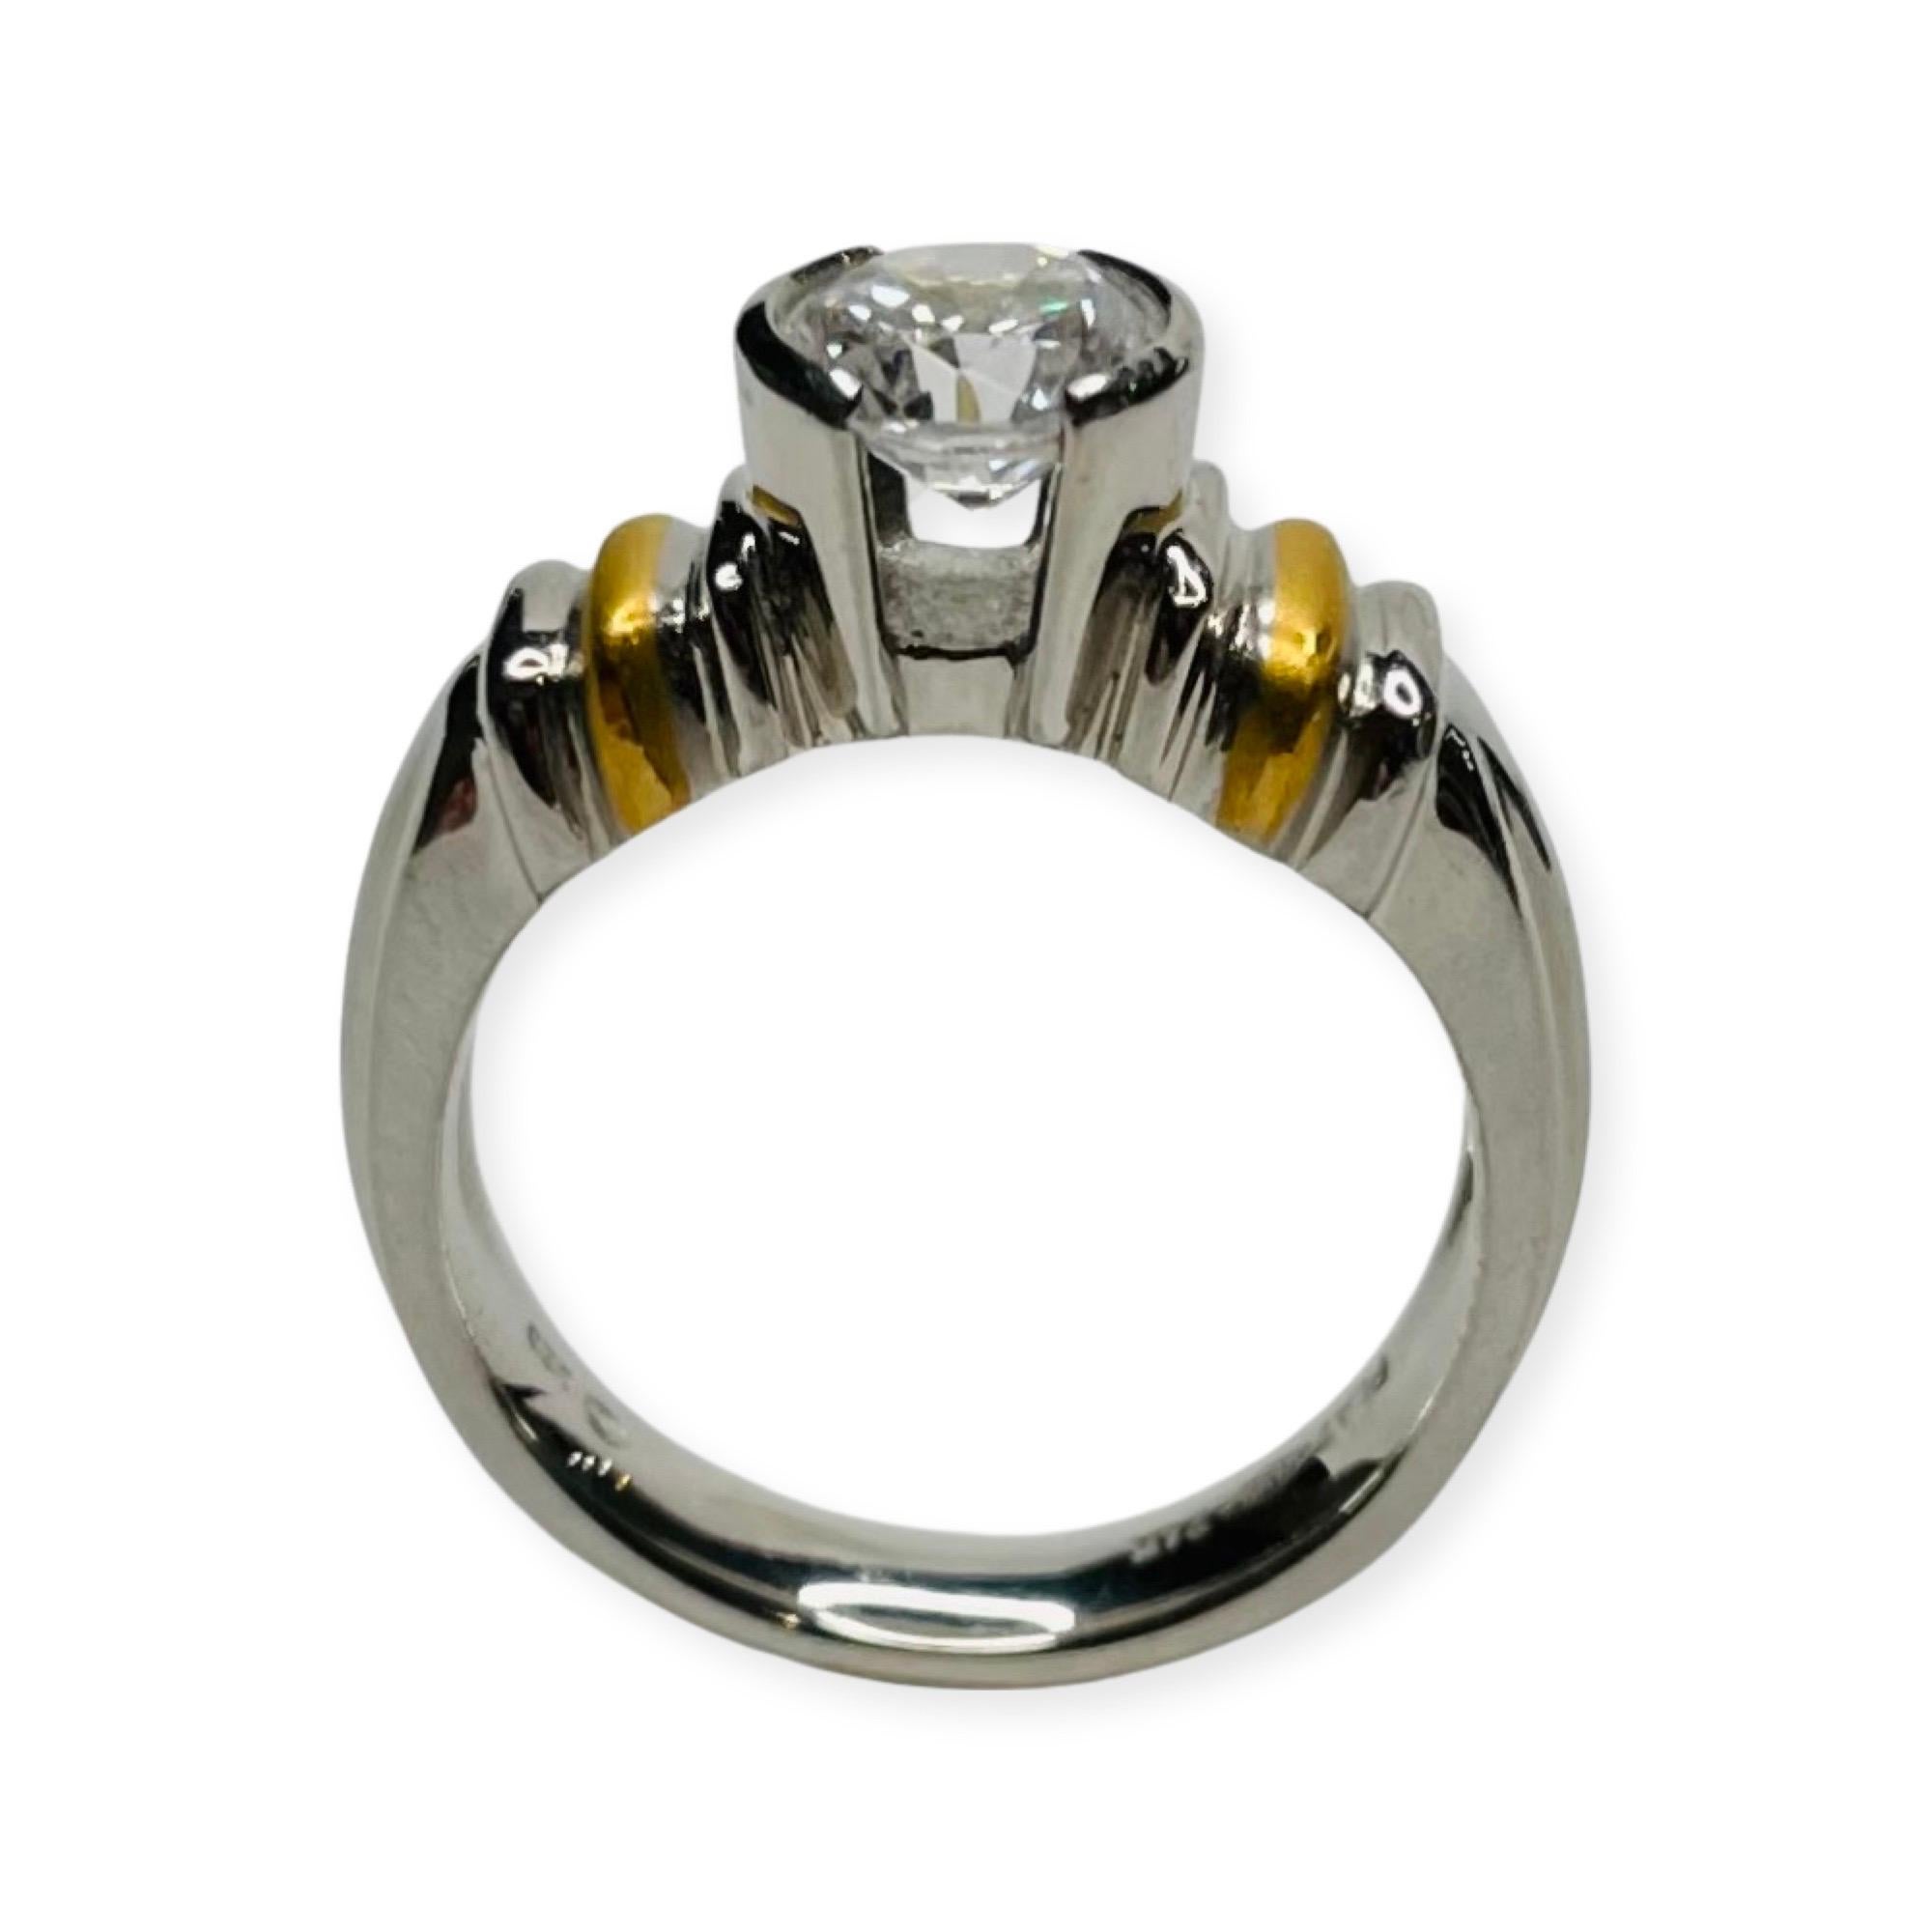 Rudolf Erdel Platinum, 24K and CZ Engagement Ring. Hallmarked Plat 950 and 24K and Trademarked OED c RE for Rudolf Erdel.  It is 6.16 mm wide. The CZ is 6.5mm which is the same size as a 1 carat diamond. It can be replaced for a moissonite,